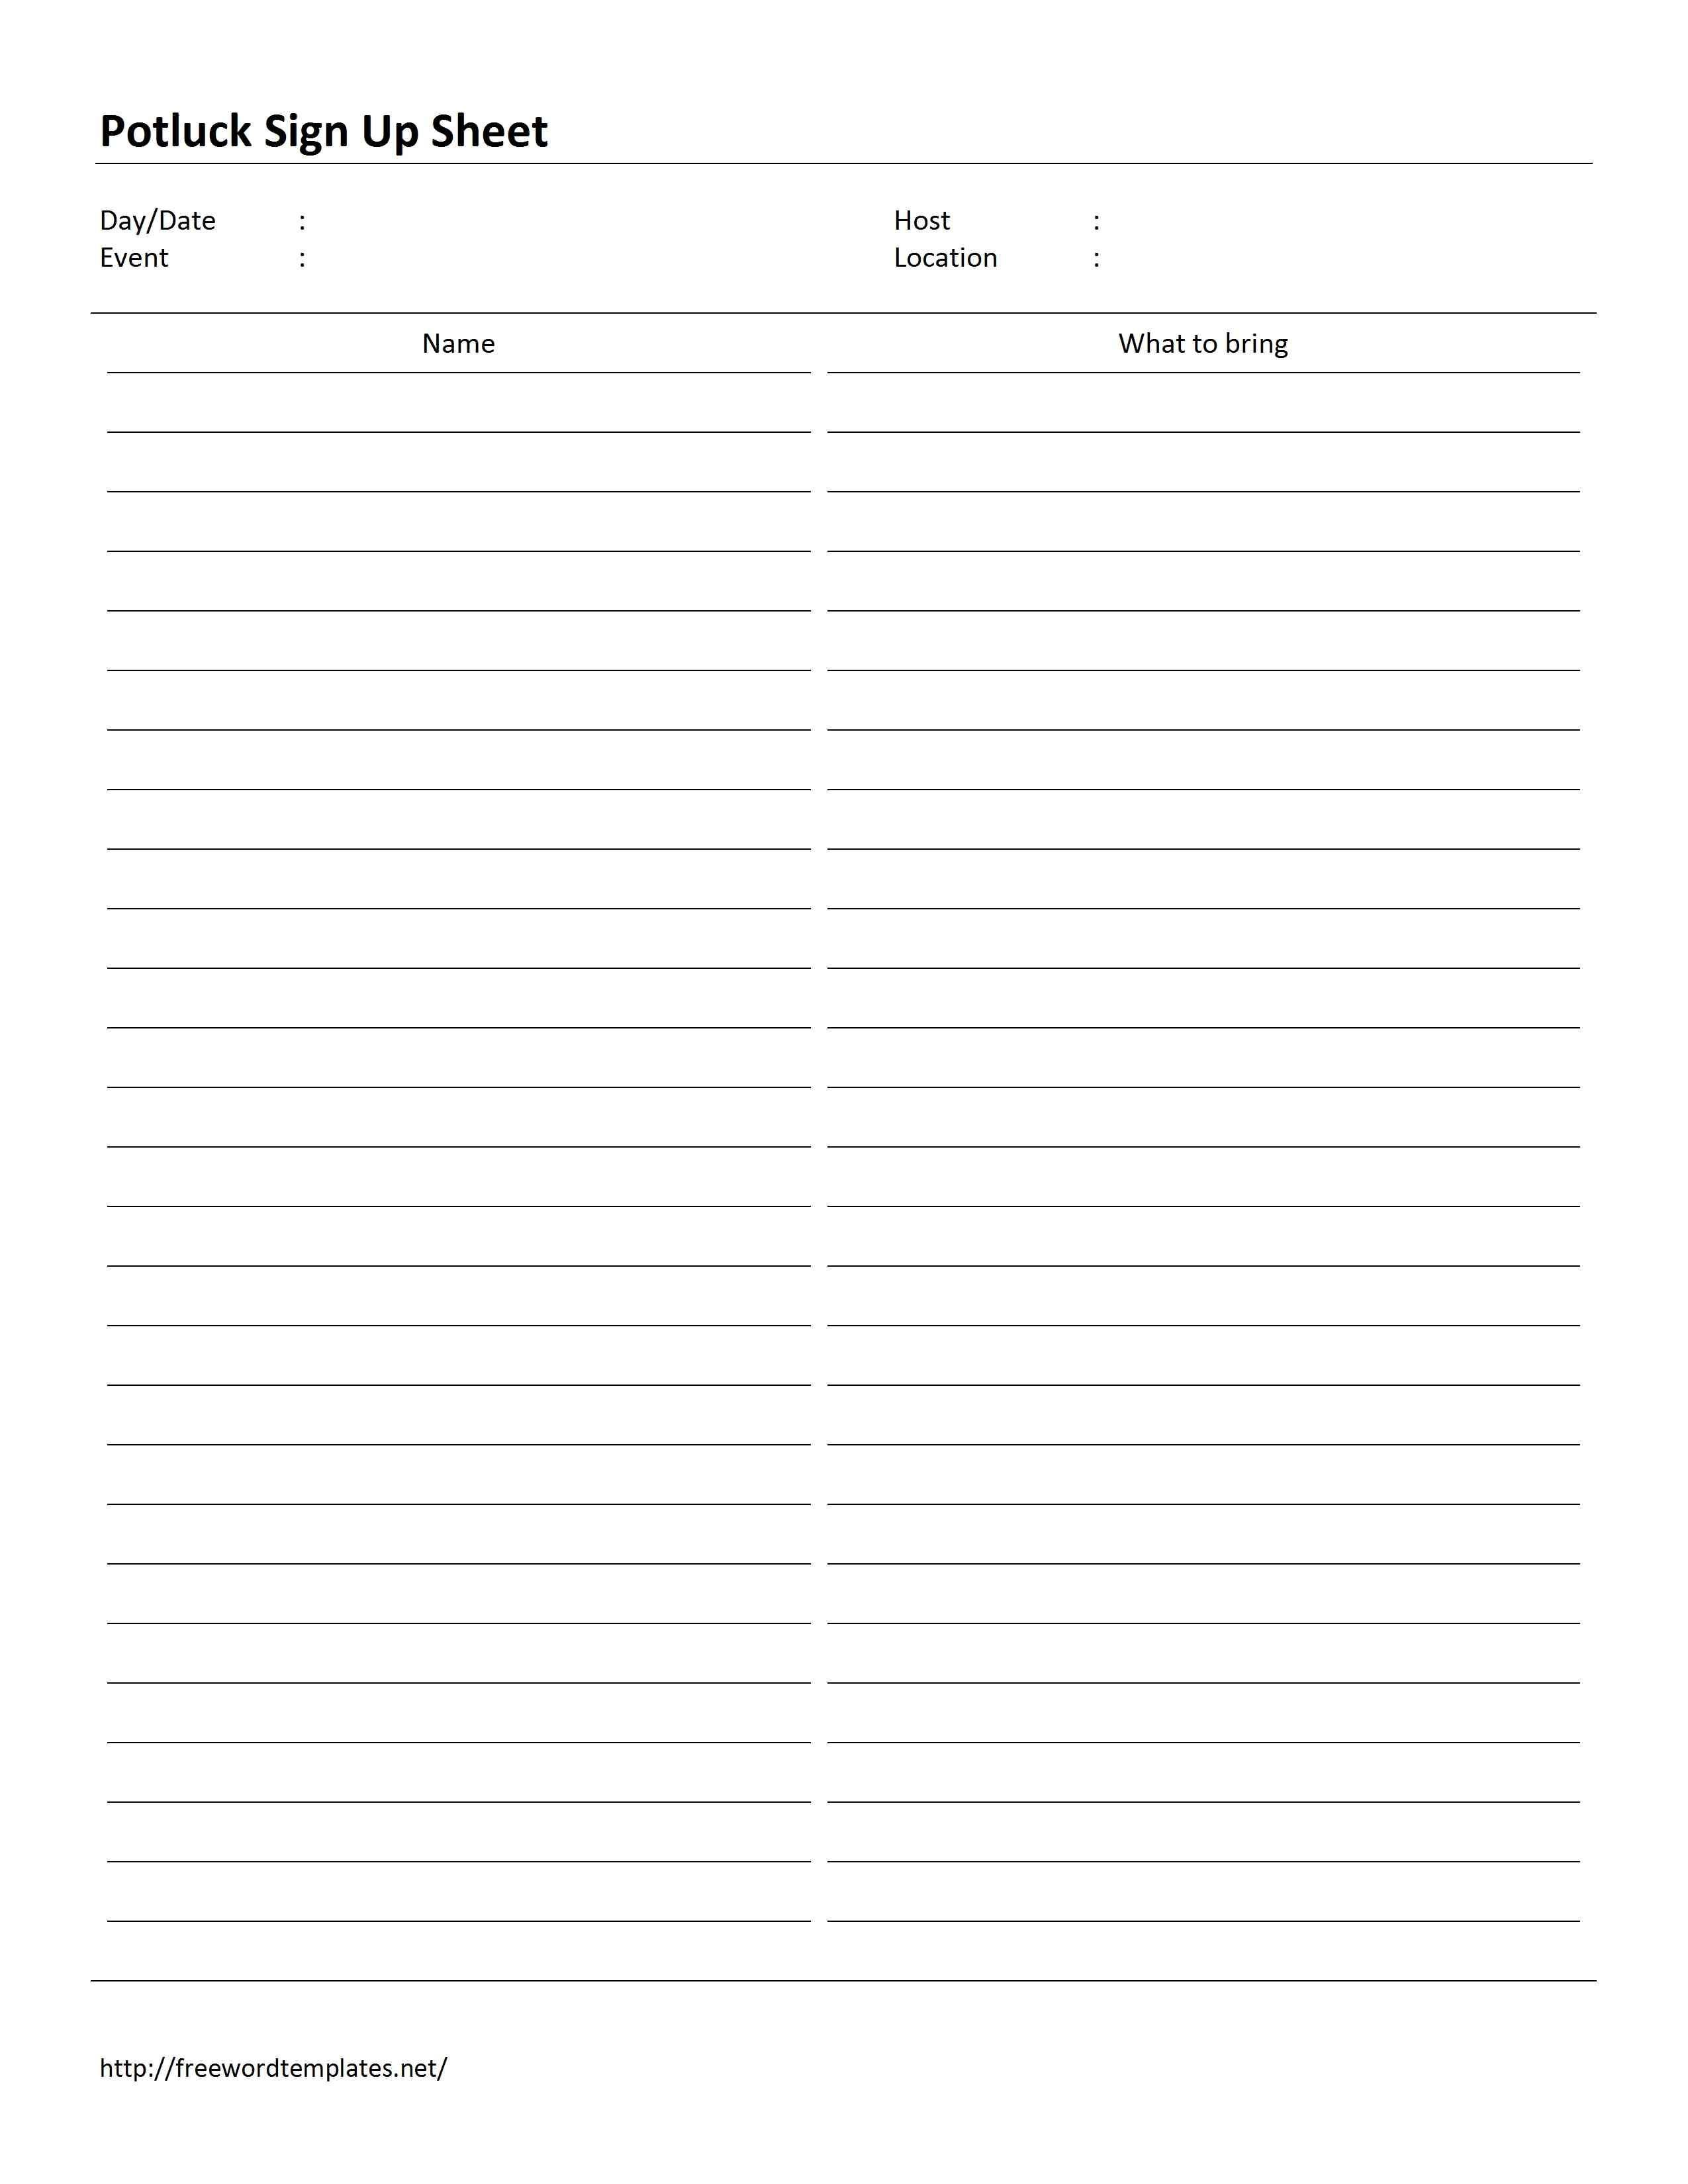 Pinchris Smith On Grandmachrisee's  Sign Up Sheets Blank Sign regarding Potluck Signup Sheet Template Word